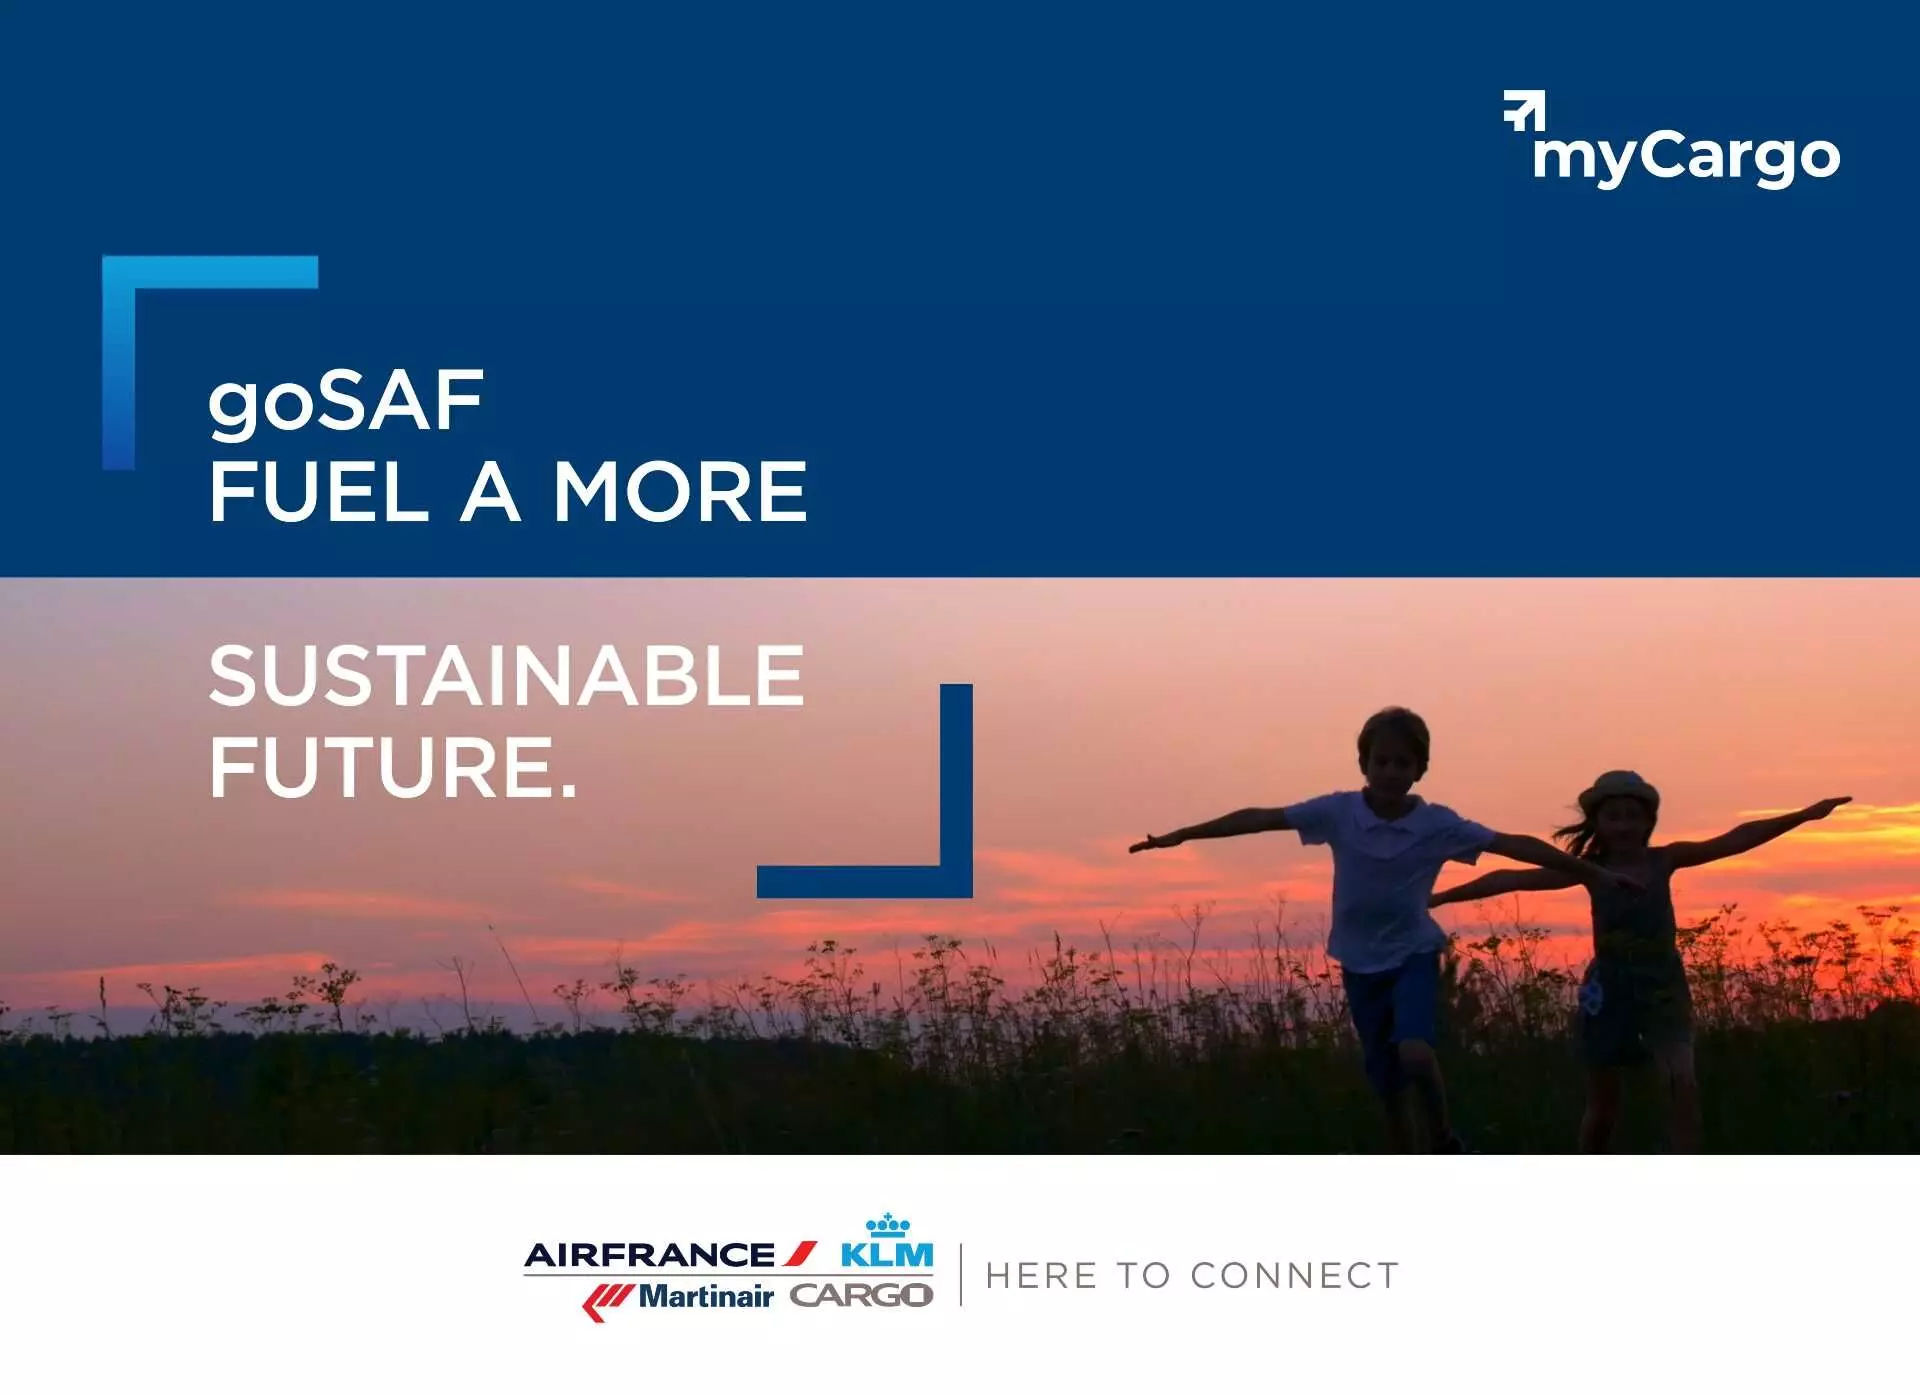 Air France KLM Martinair Cargo flags off a sustainable alternative with goSAF